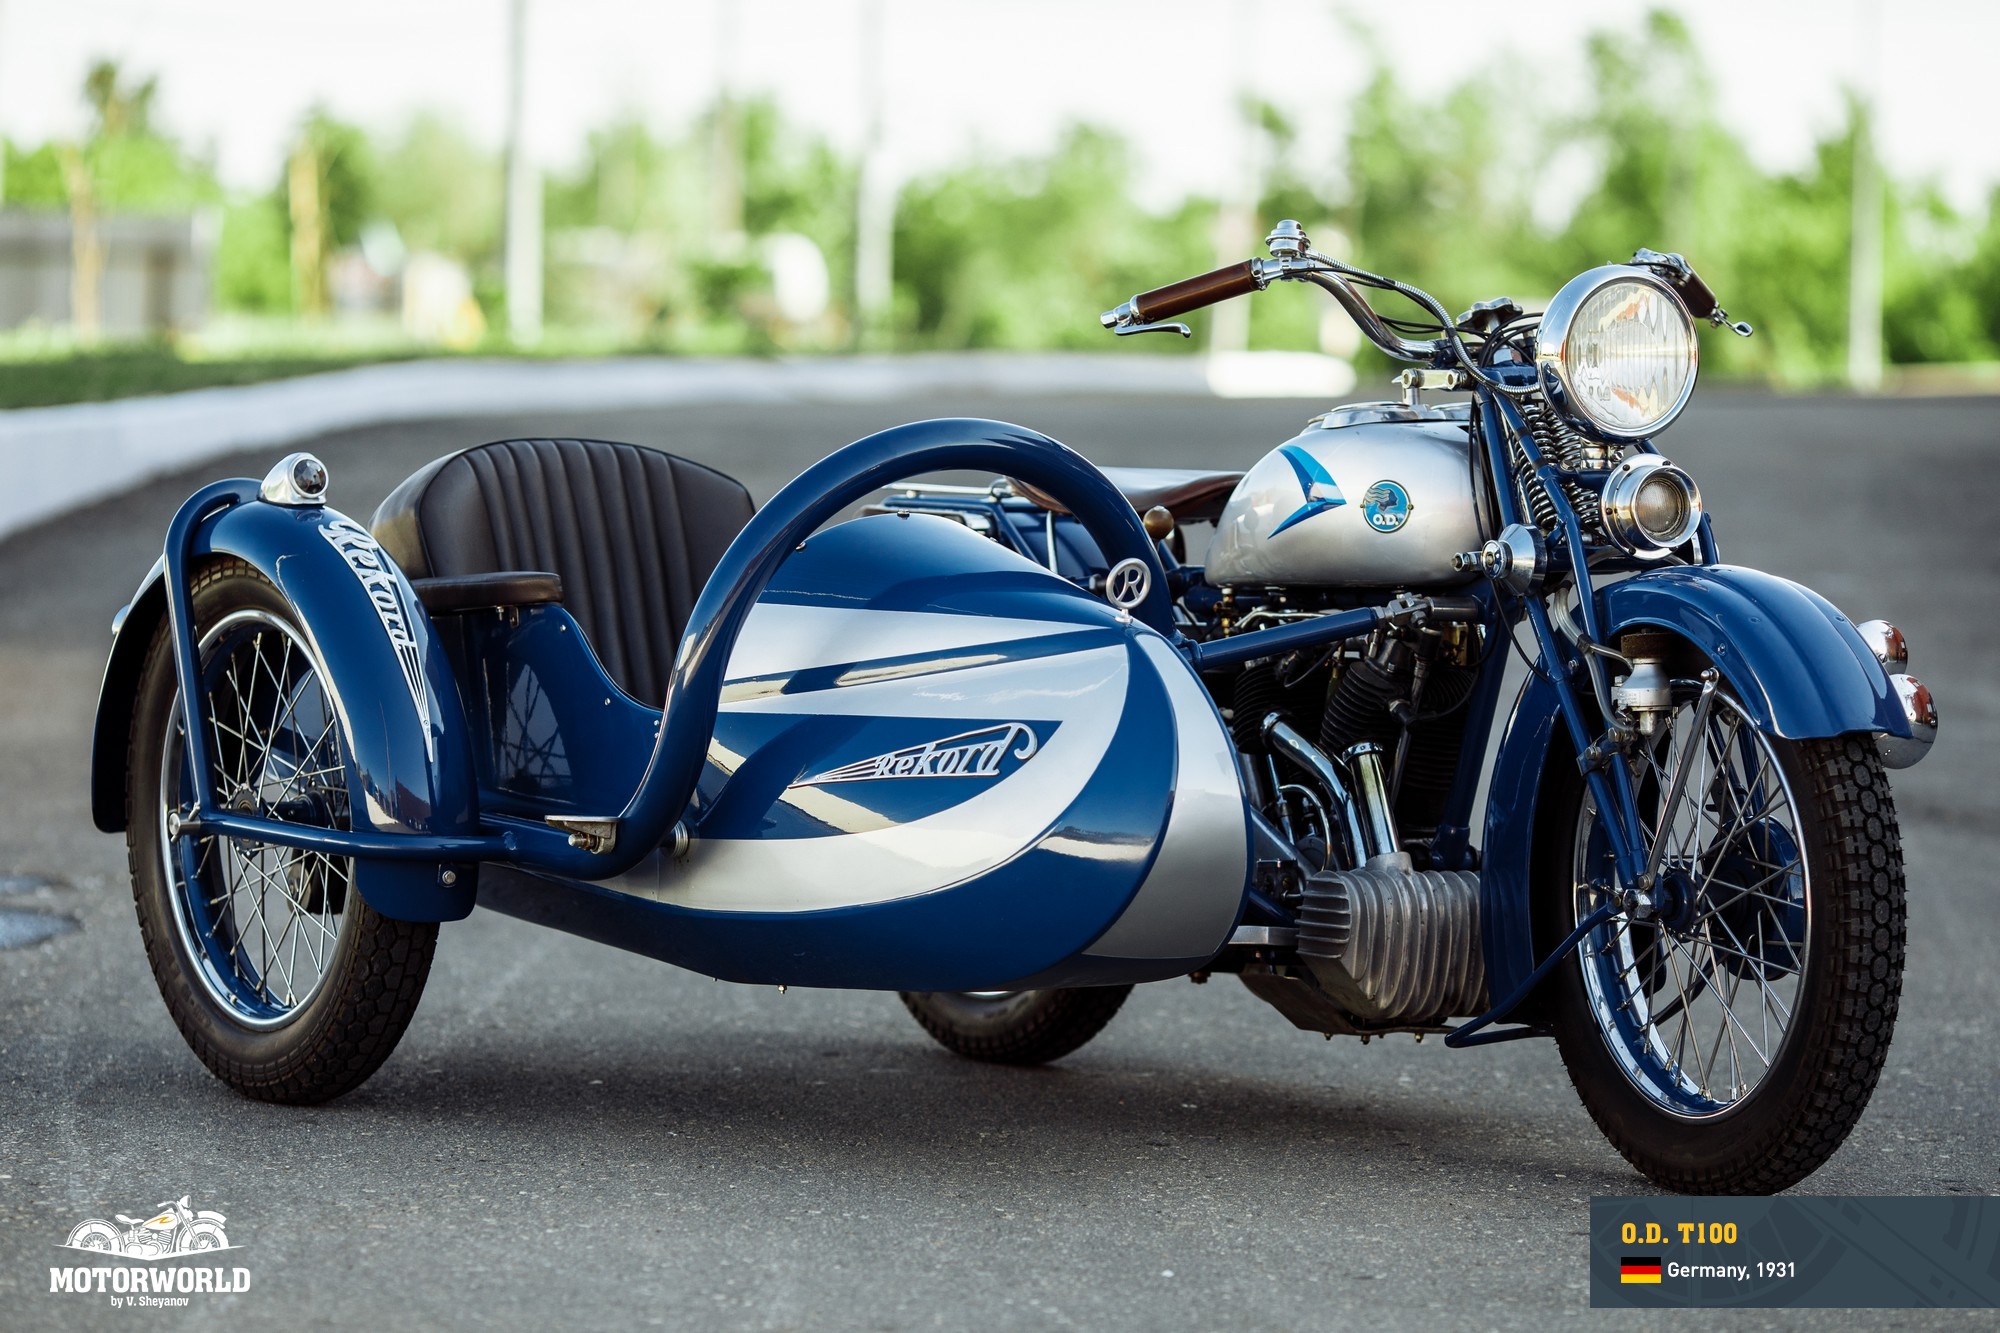 1931, OD T100 motorcycle